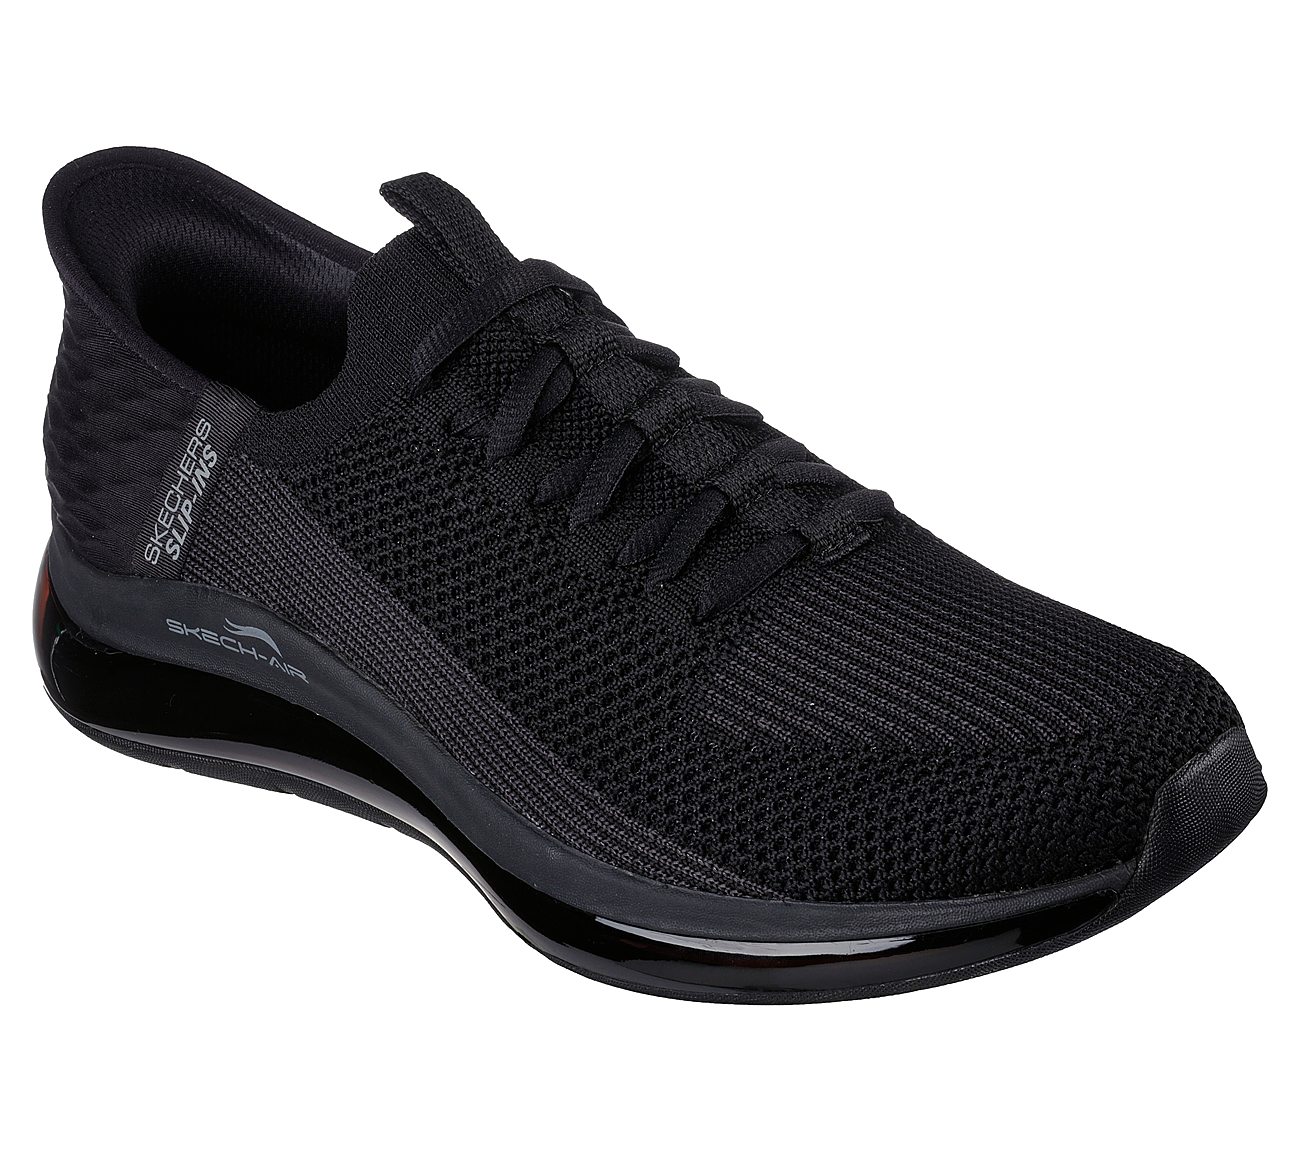 SKECH-AIR ELEMENT 2.0 - NEW W, BBLACK Footwear Right View